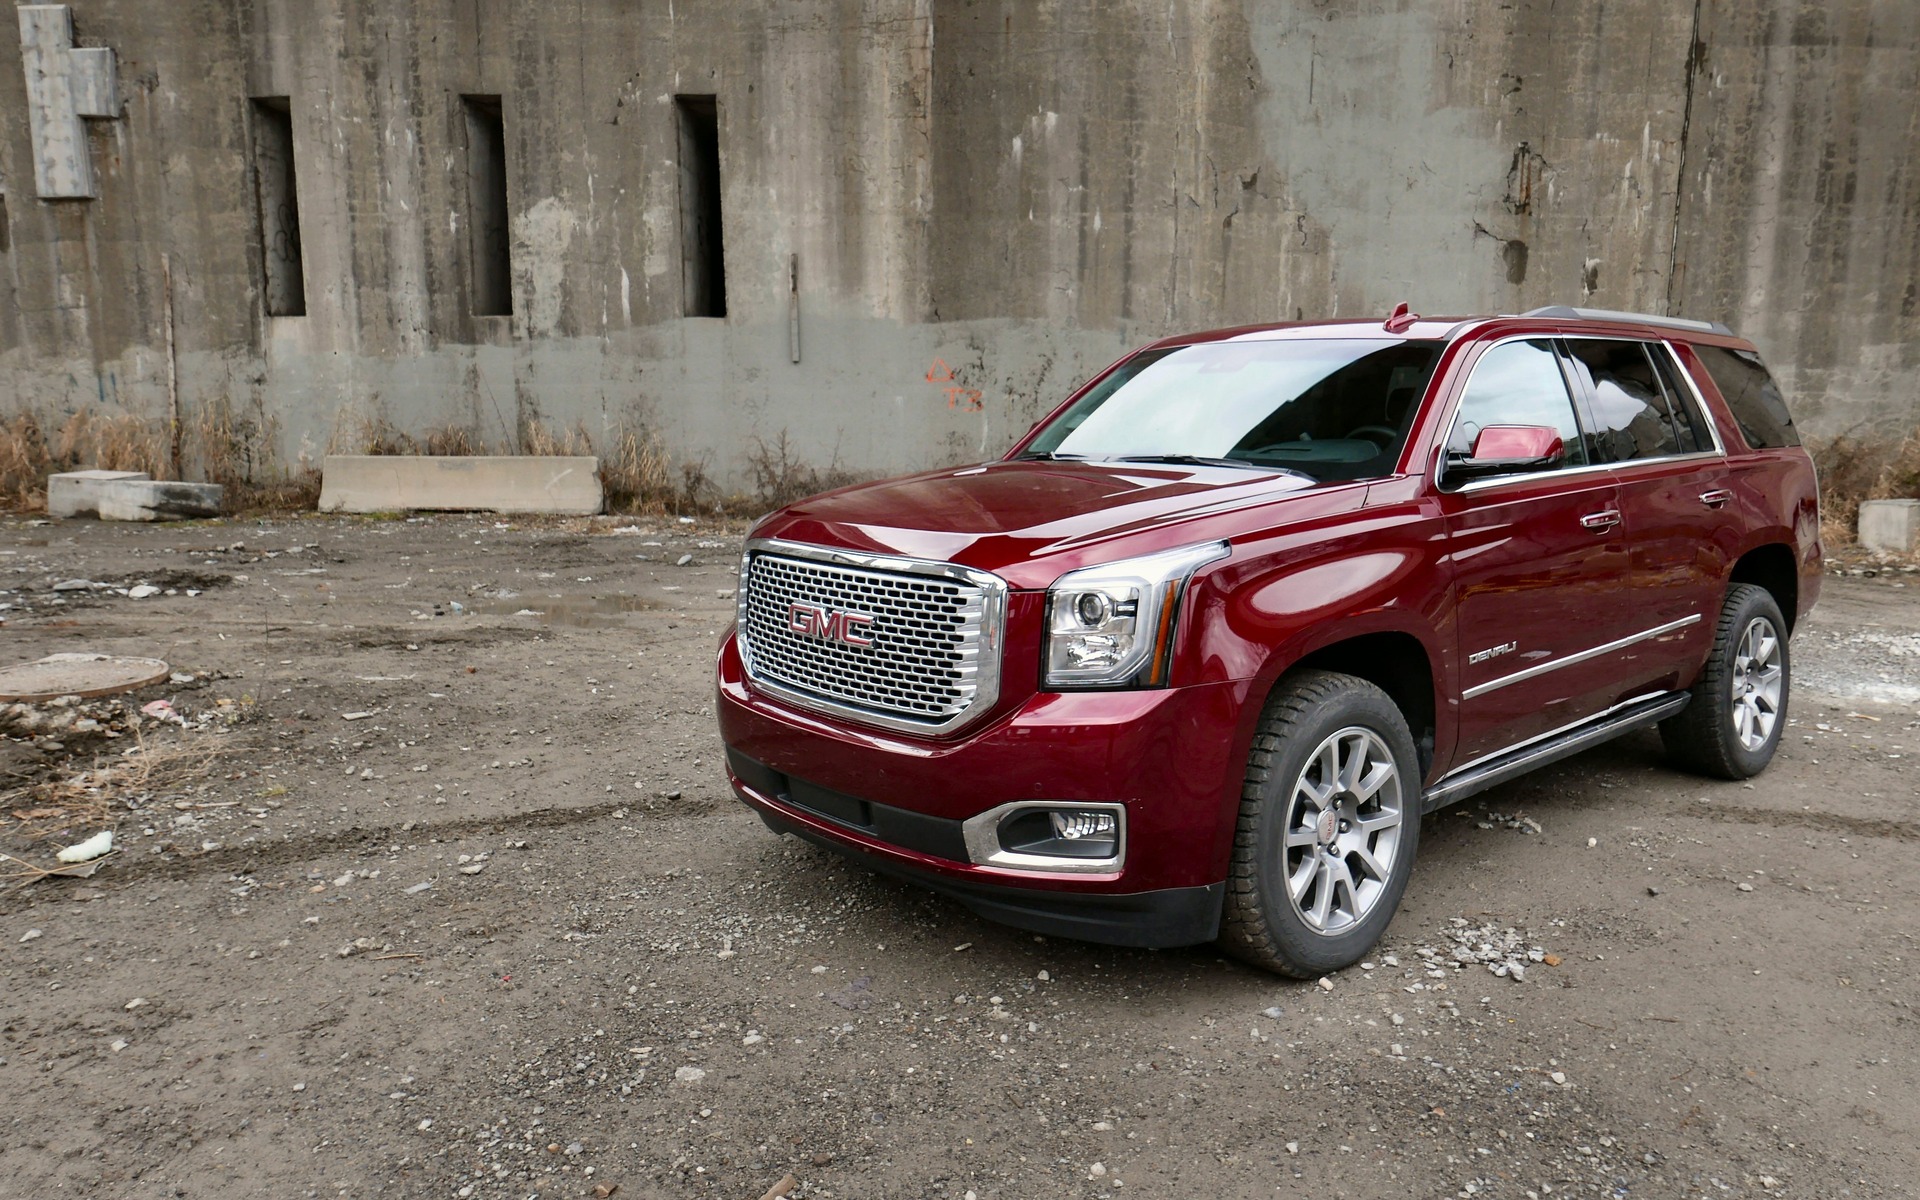 2017 Gmc Yukon 2wd 4dr Slt Specifications The Car Guide